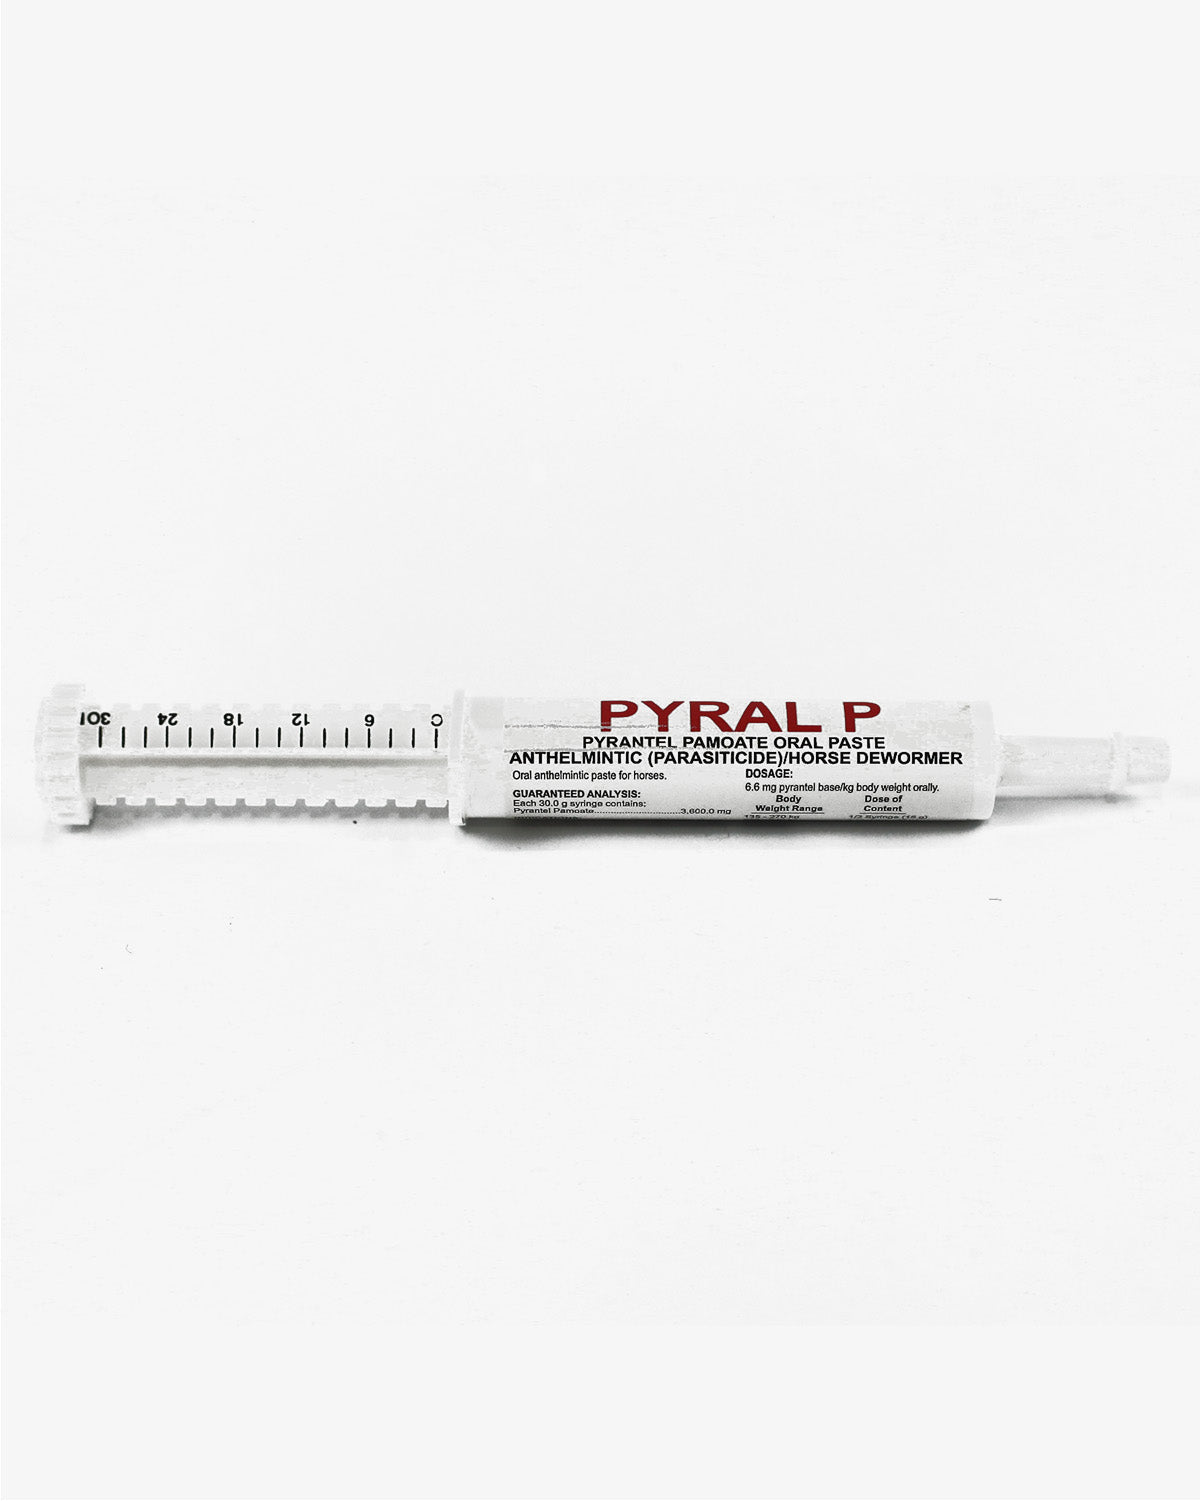 Pyral P